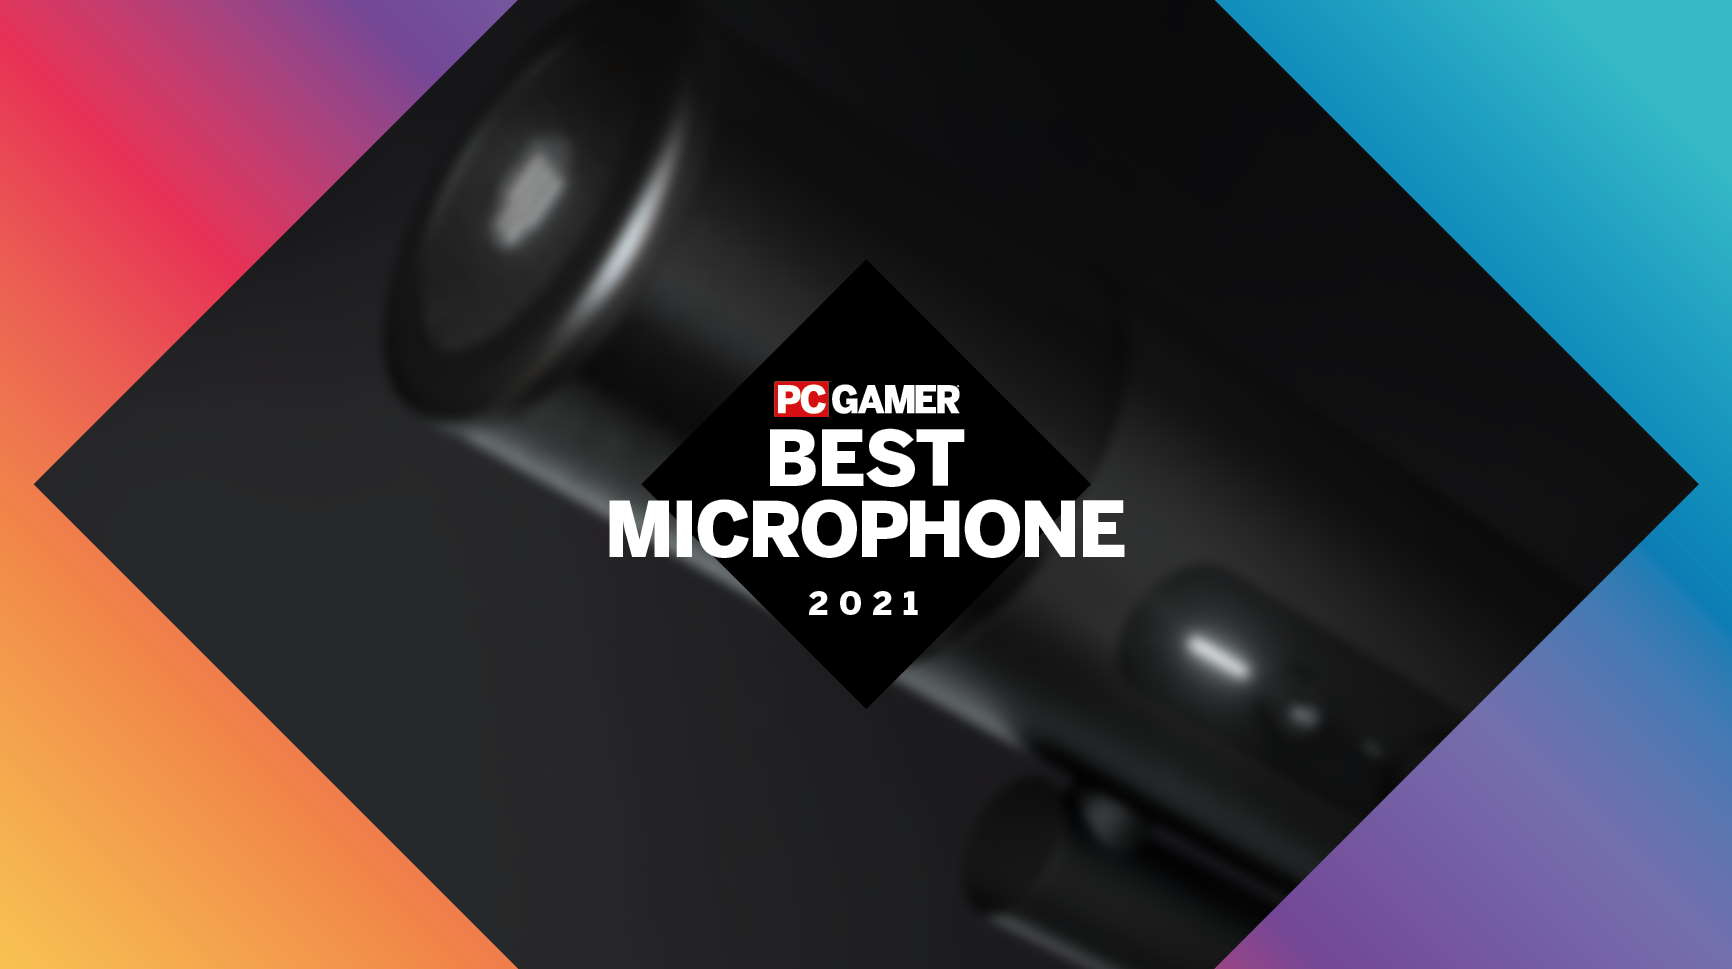  PC Gamer Hardware Awards: What is the best microphone of 2021? 